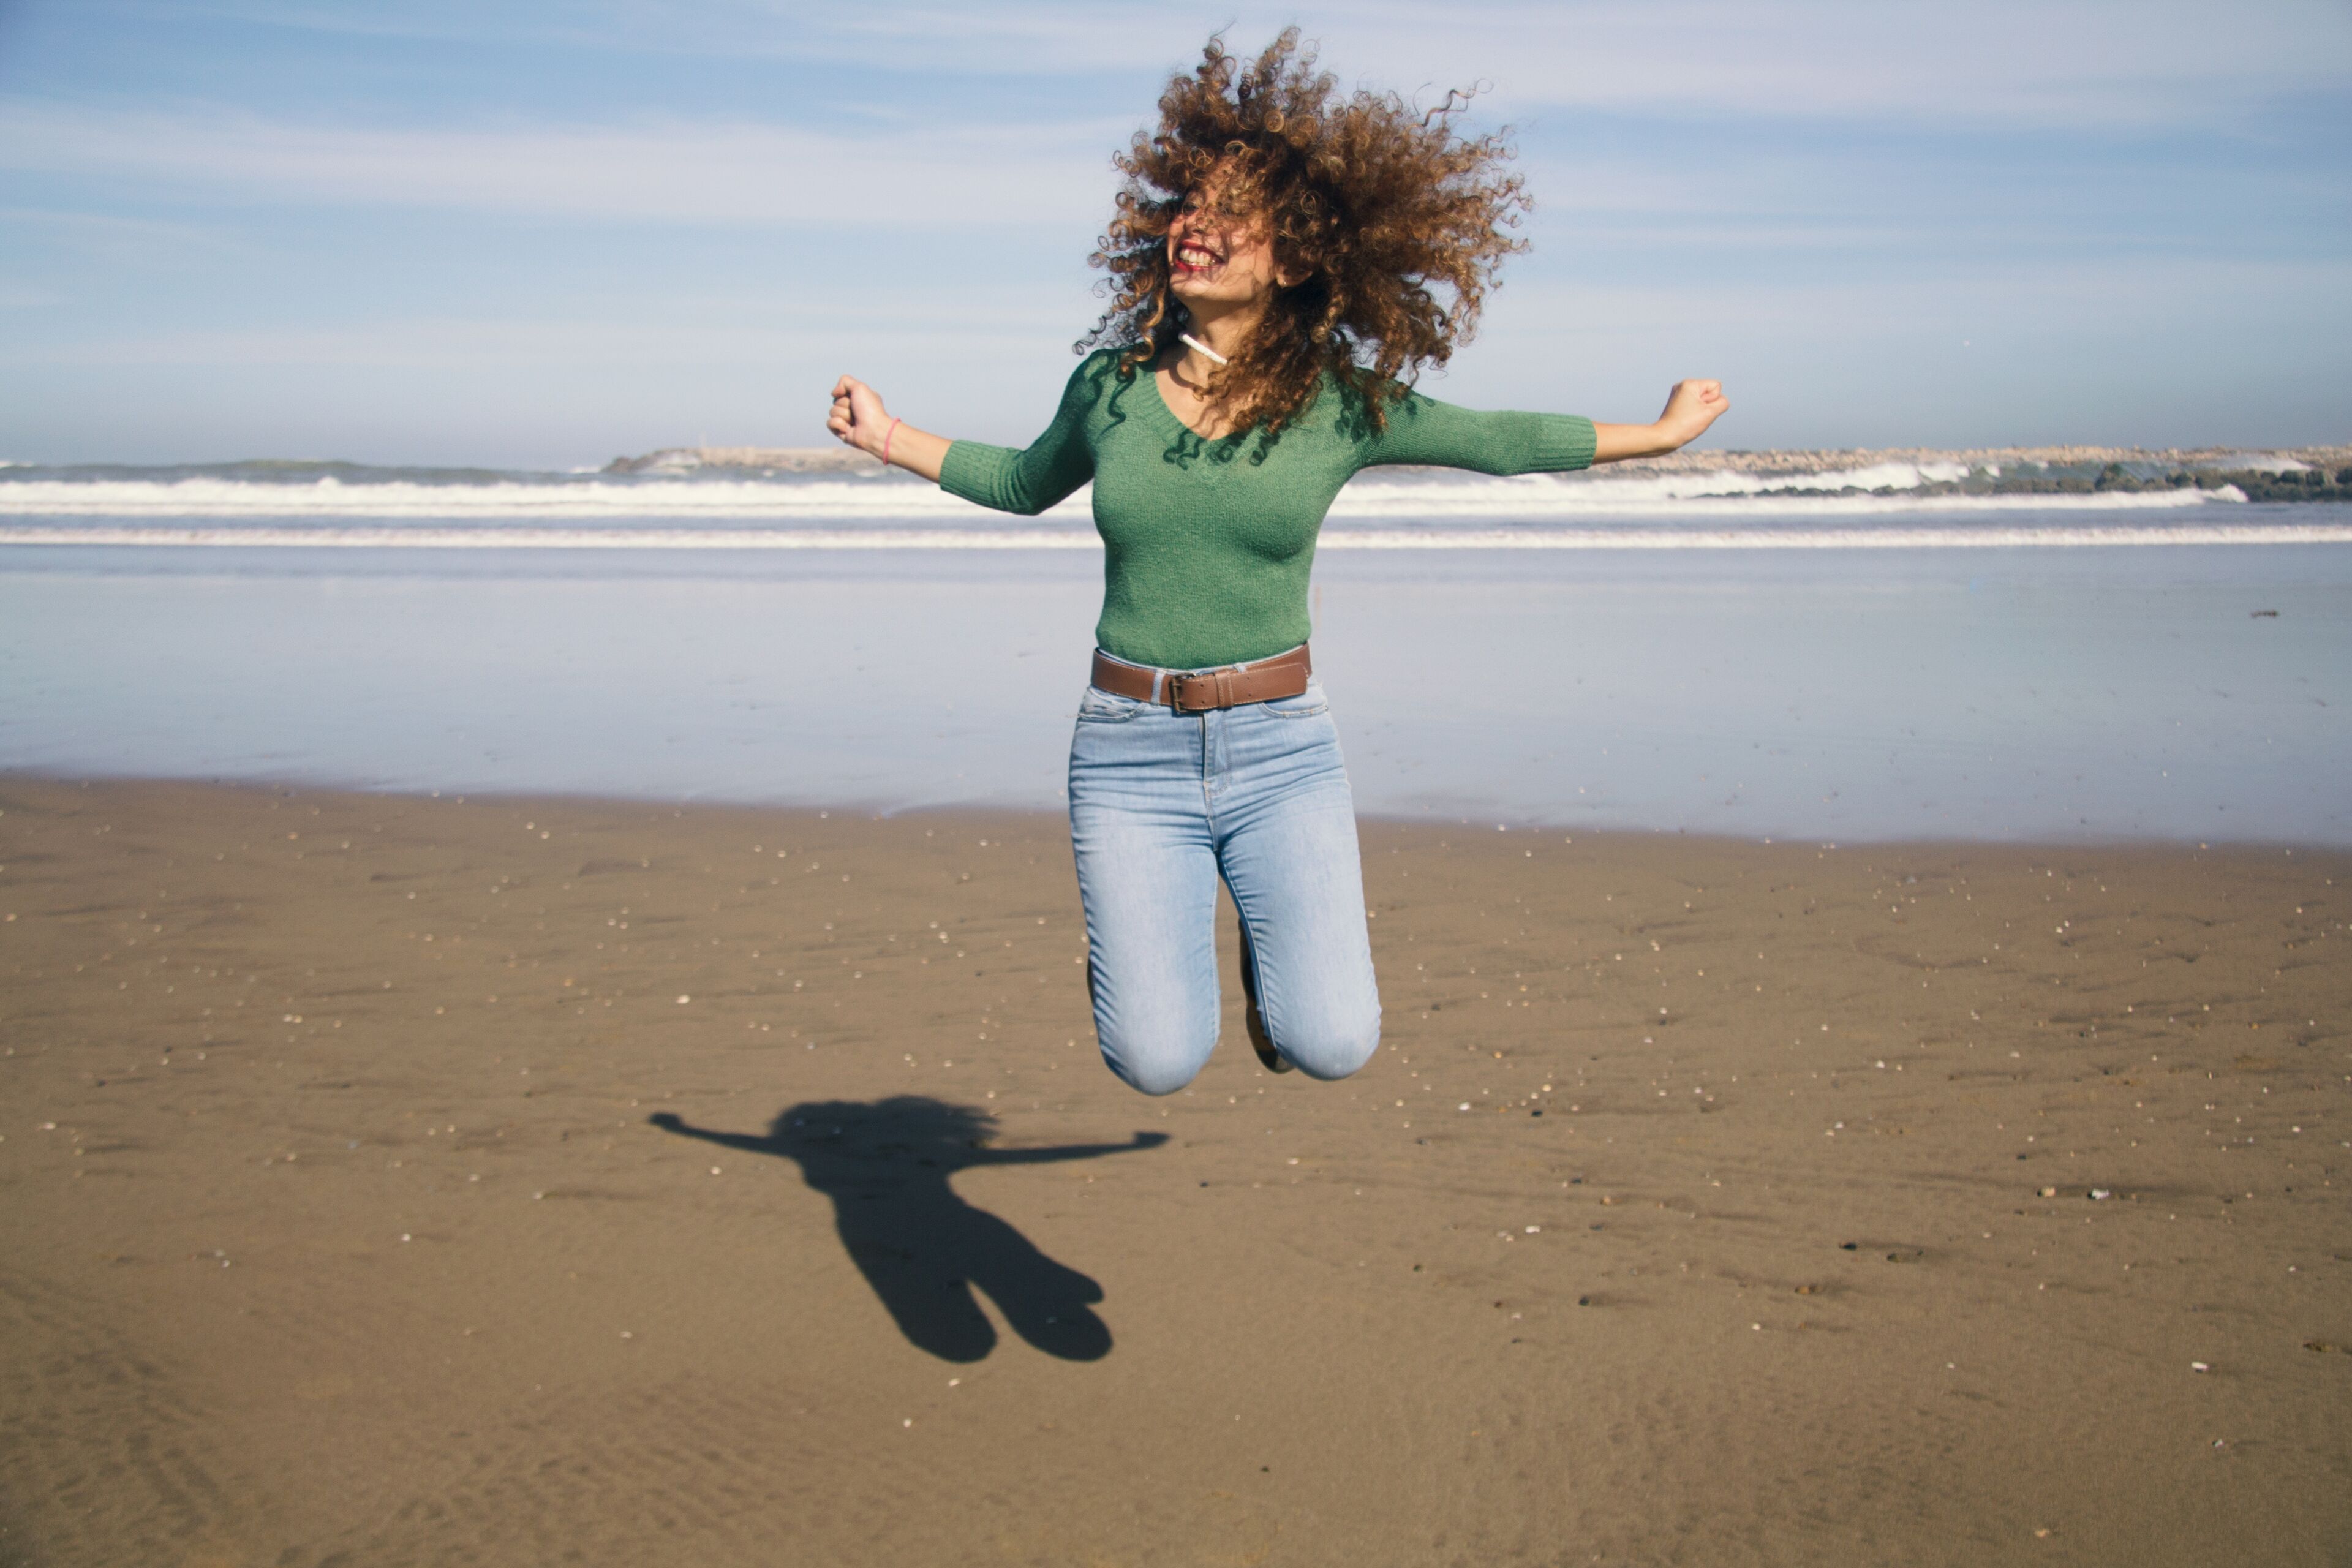 A person with curly hair in mid-jump, smiling broadly, against a beach backdrop with gentle waves.